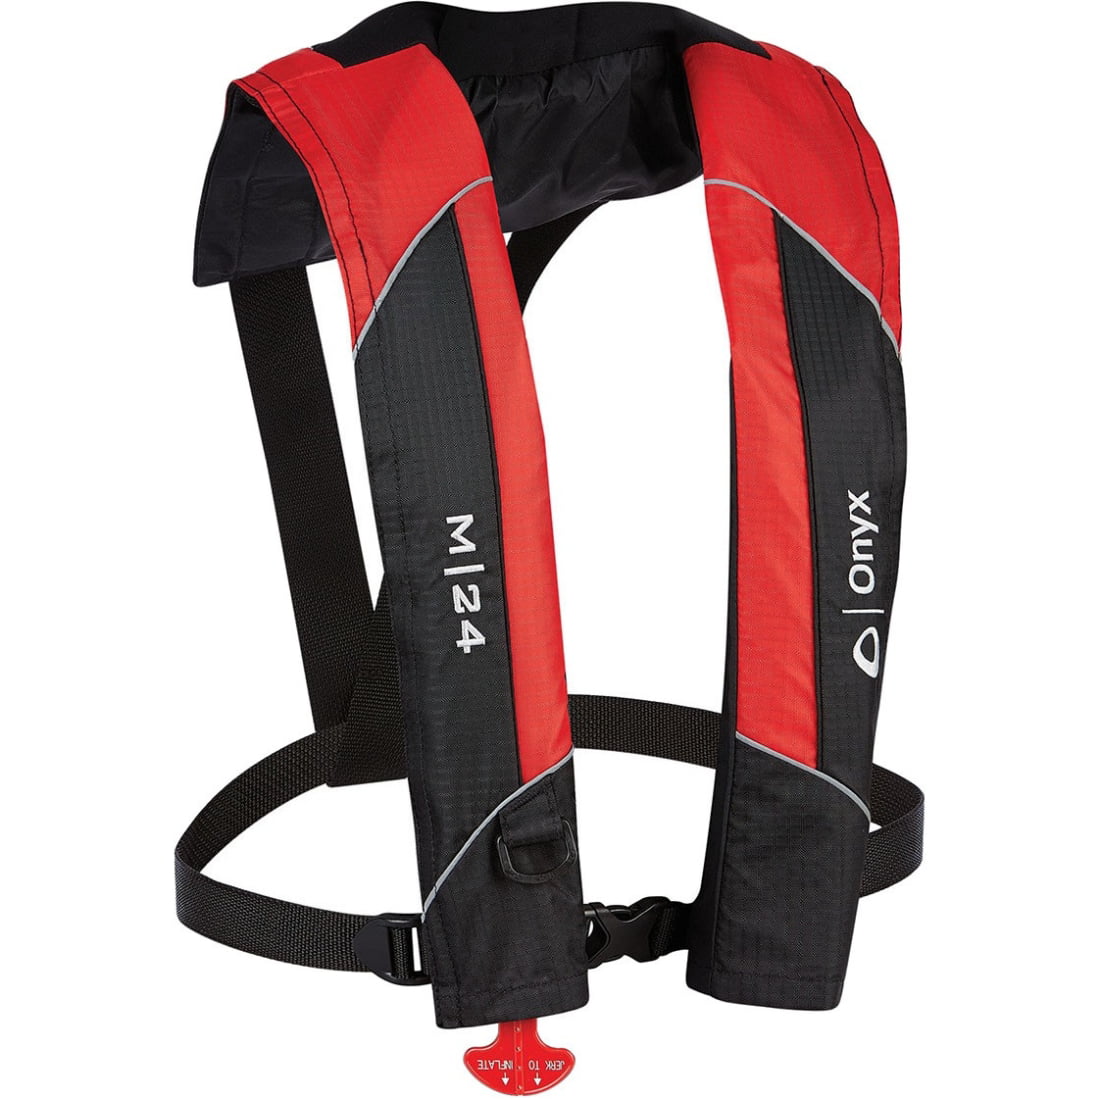 Onyx #131000-100-004-15 M-24 Manual Inflatable Life Jacket, Red